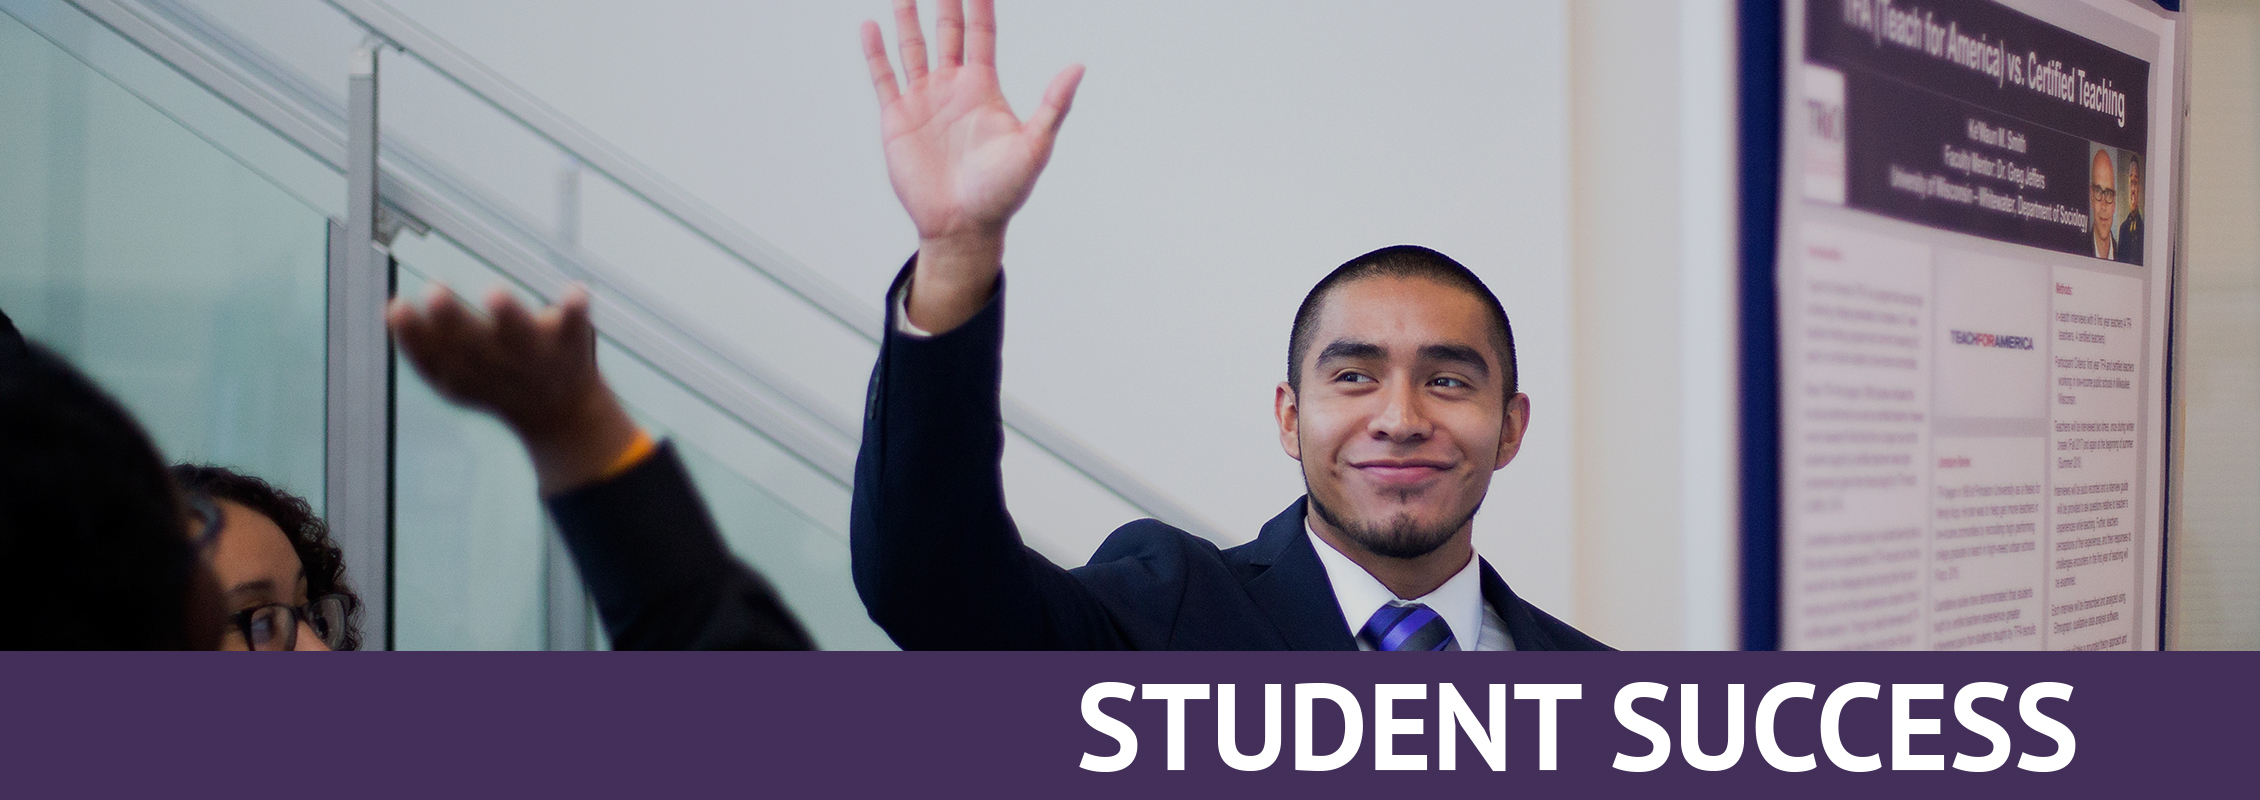 Student Success: A smiling student in a suit with his hand raised in front of his research project